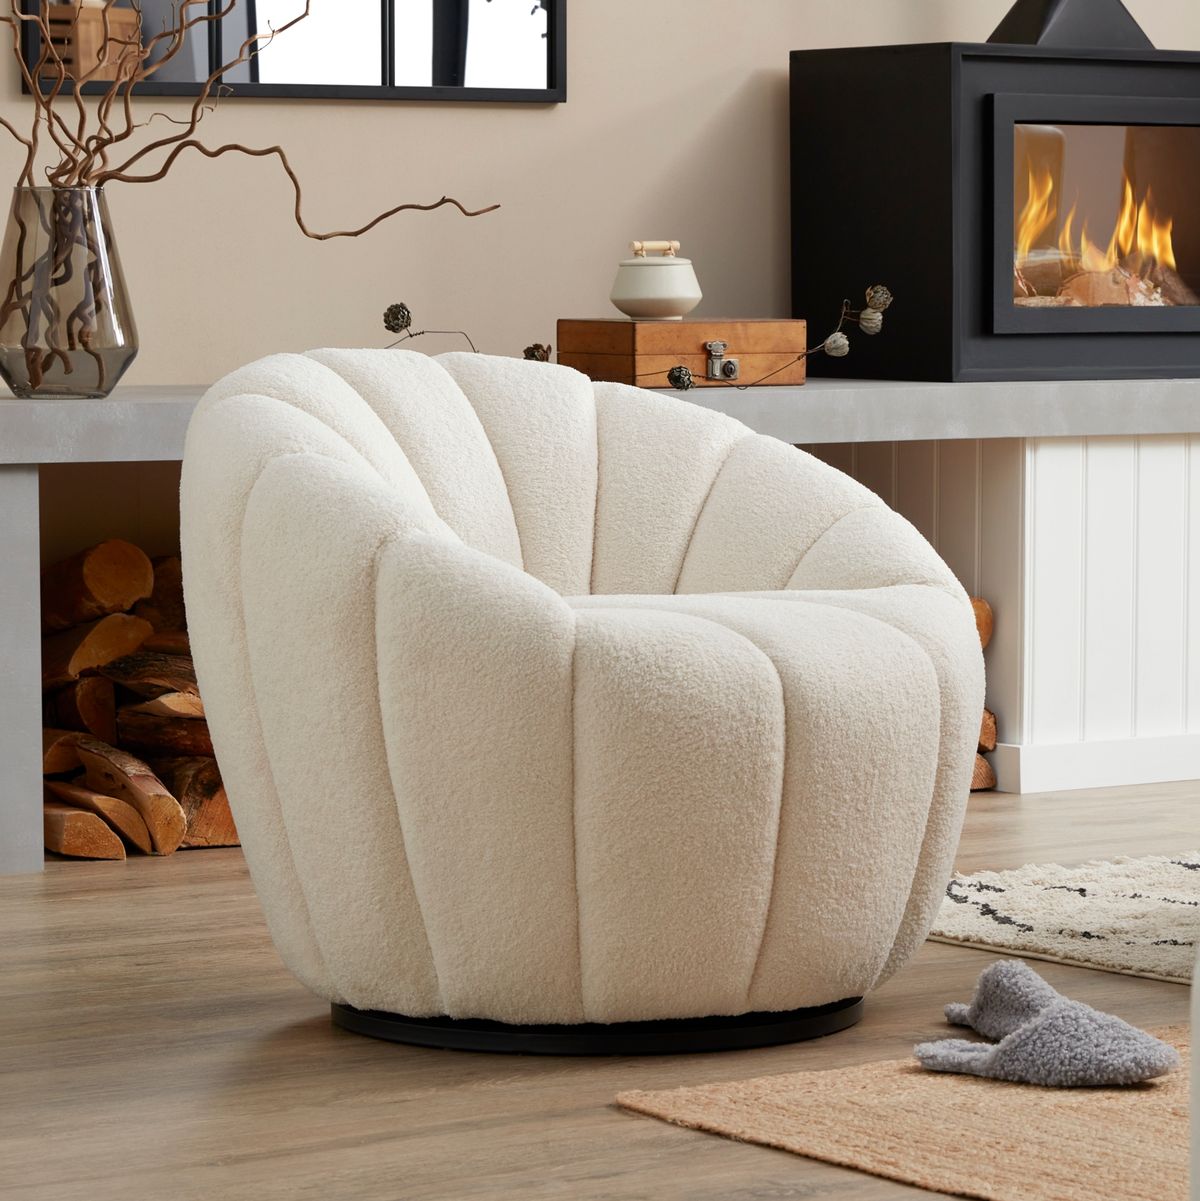 homebase launches £275 dupe of ﻿﻿£1,695 ﻿soho home bouclé chair